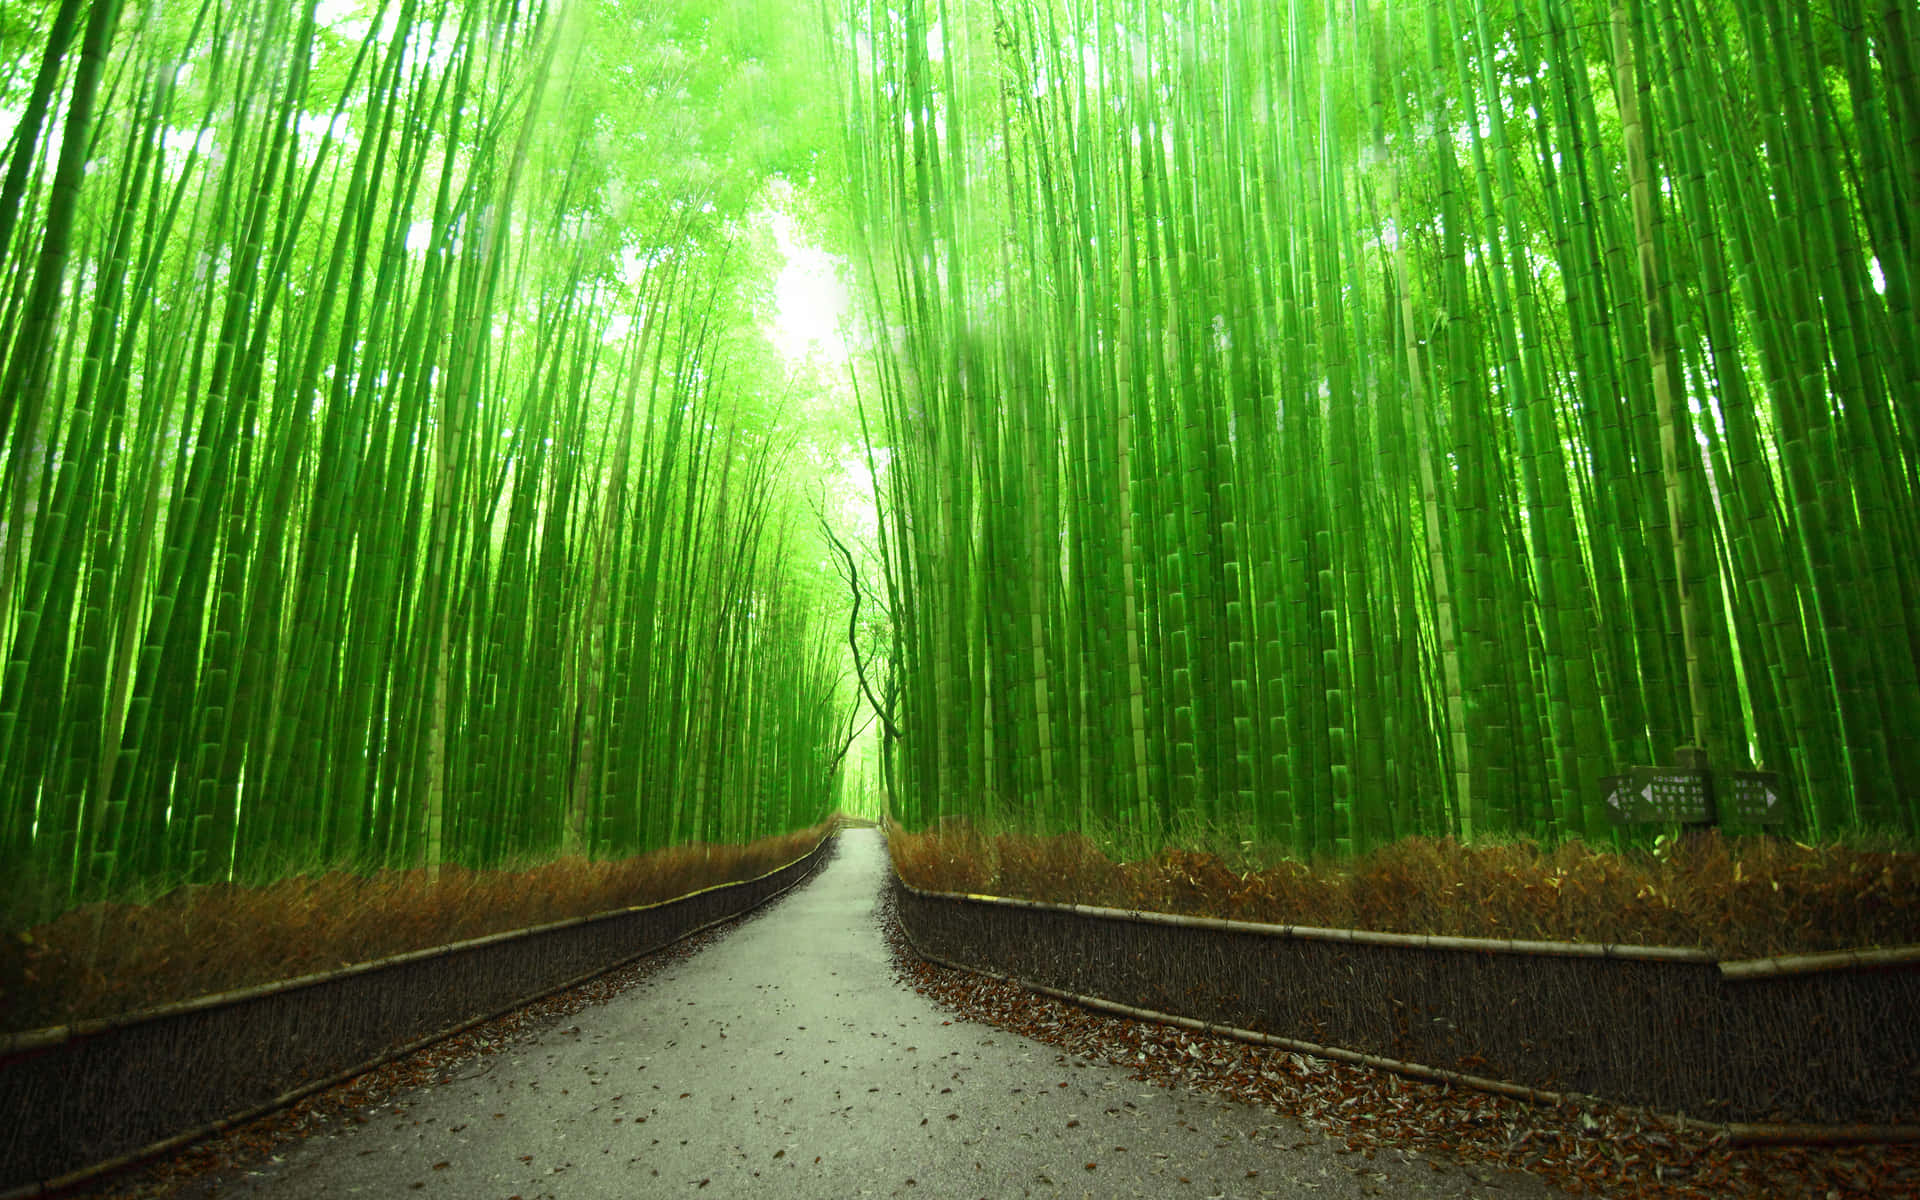 Bamboo Forest Passage Background